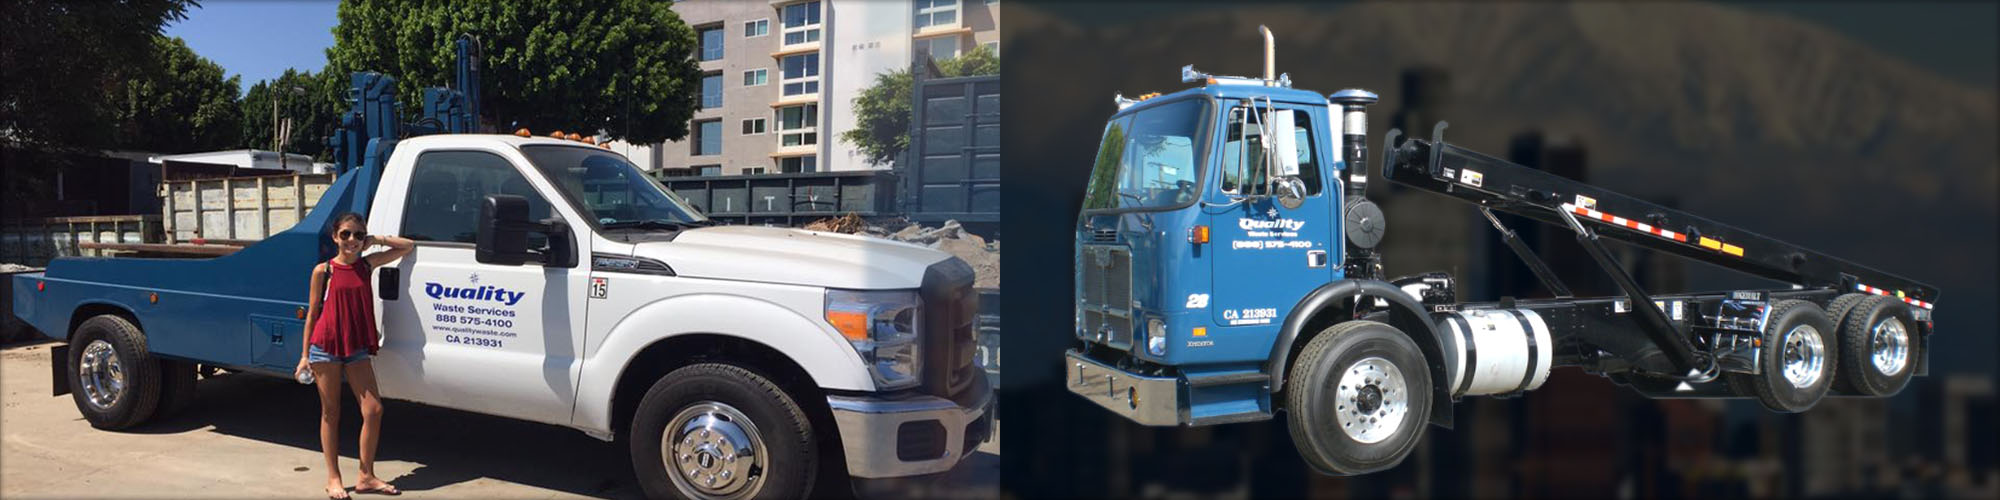 Local Dumpster Provider in Los Angeles, CA